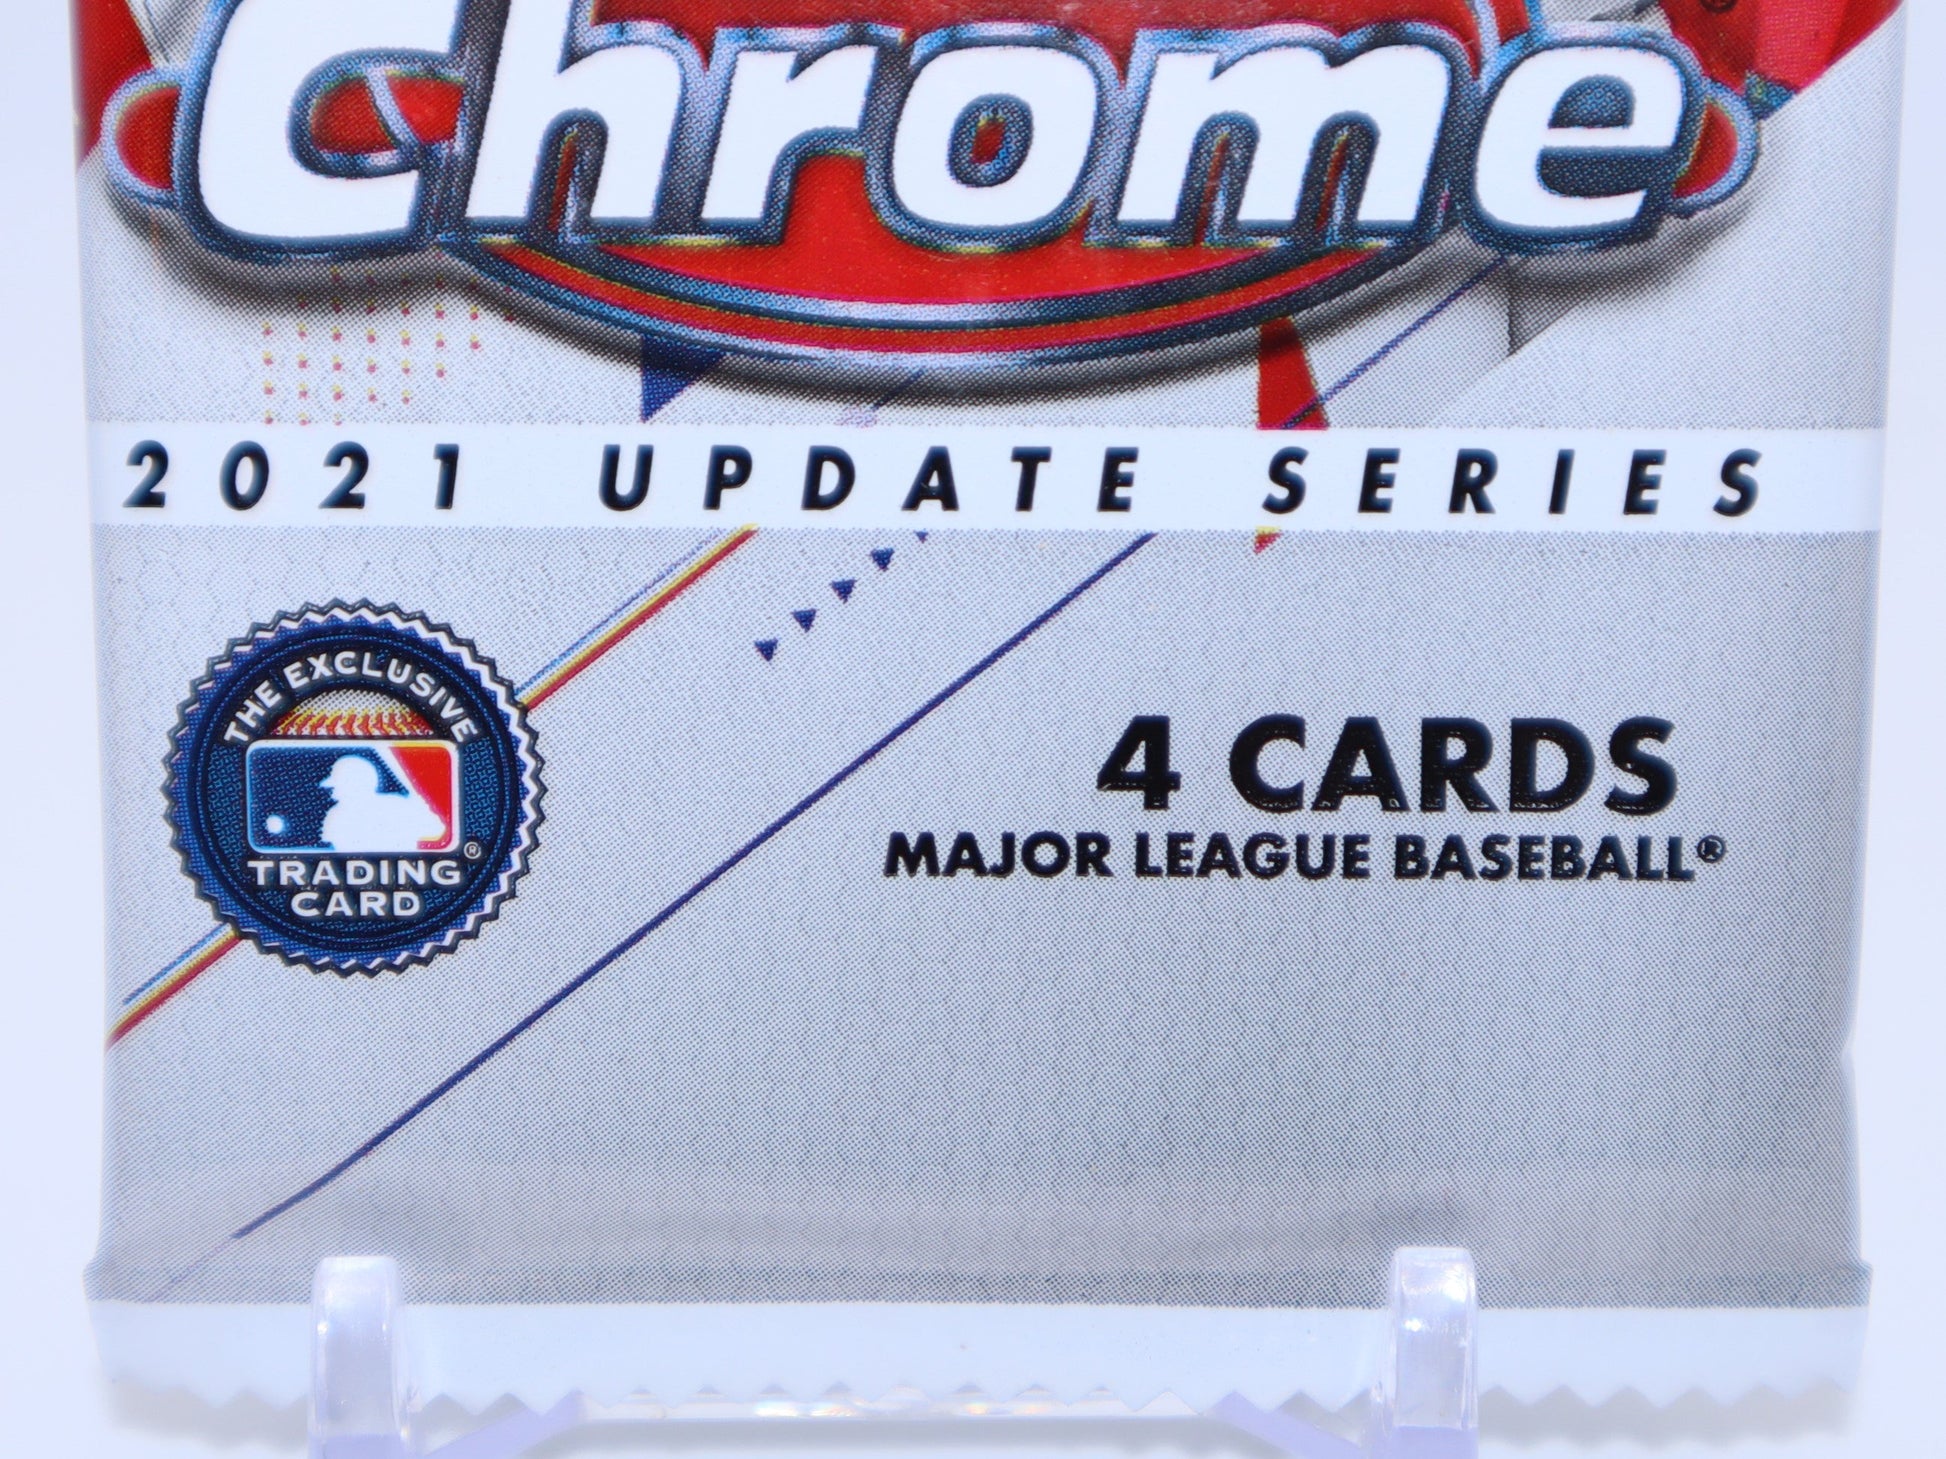 2021 Topps Chrome Update Baseball Cards Mega Box Wax Pack - Collectibles